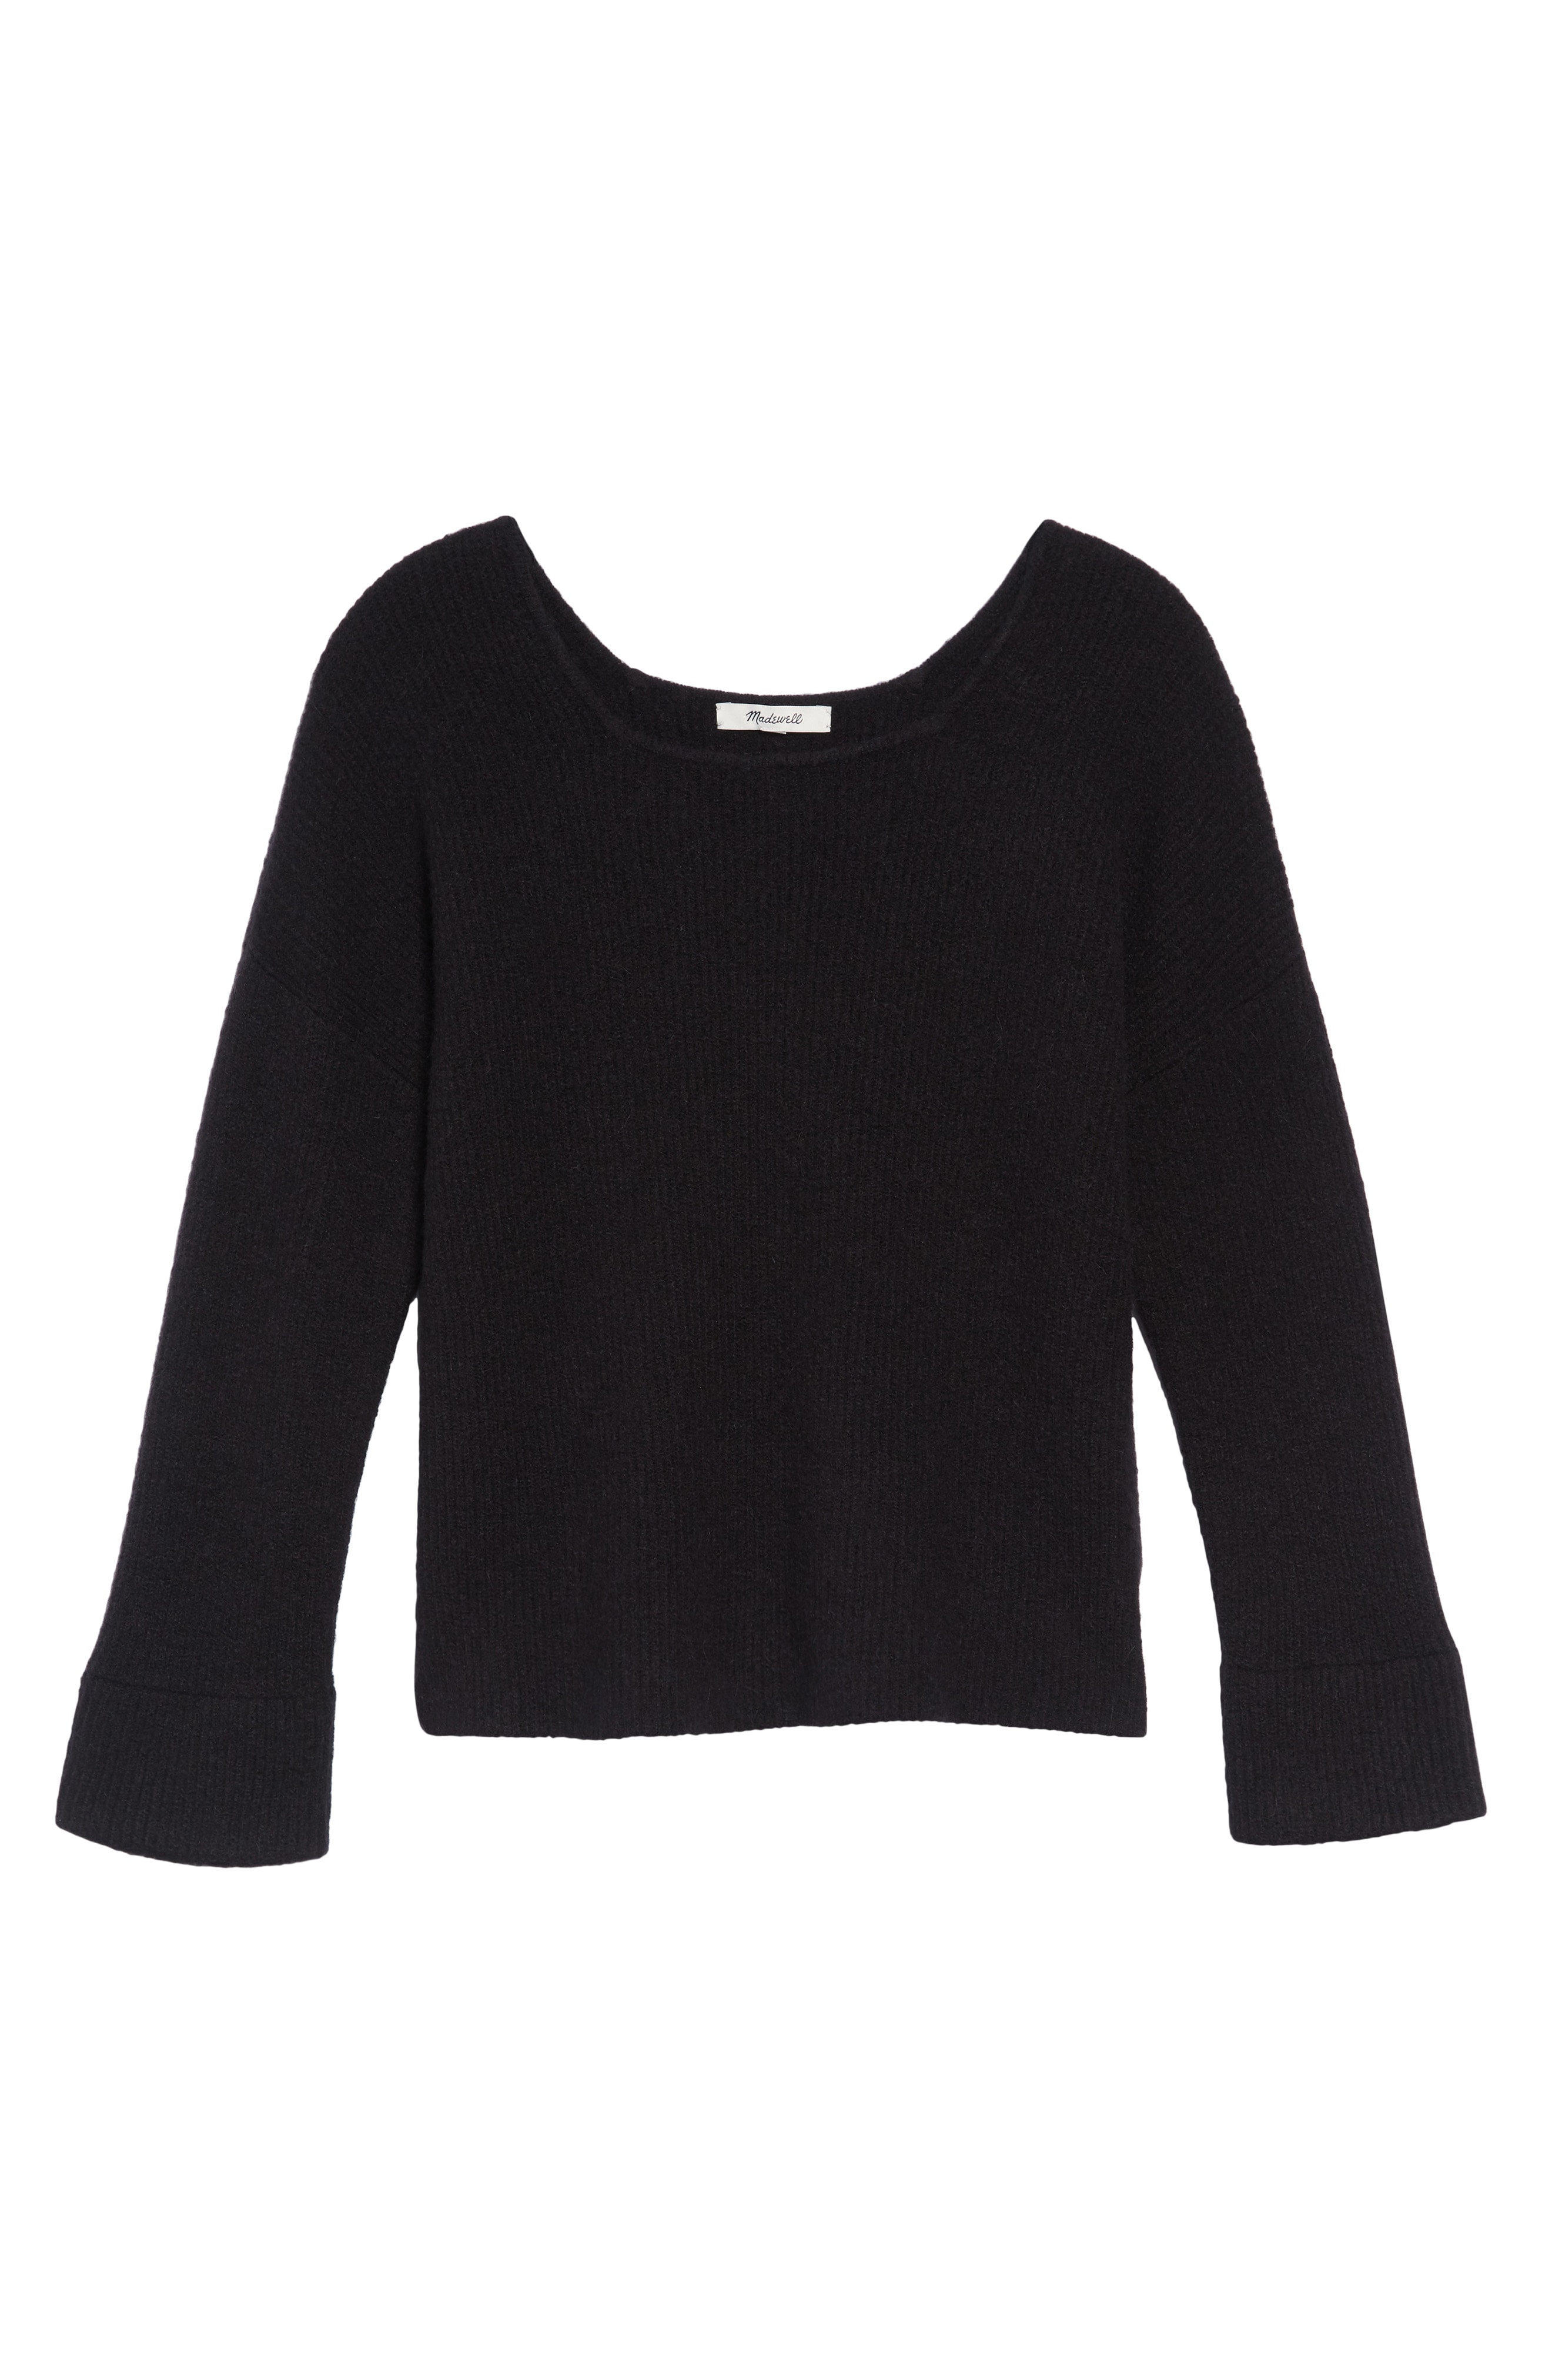 Madewell Square Neck Pullover Sweater